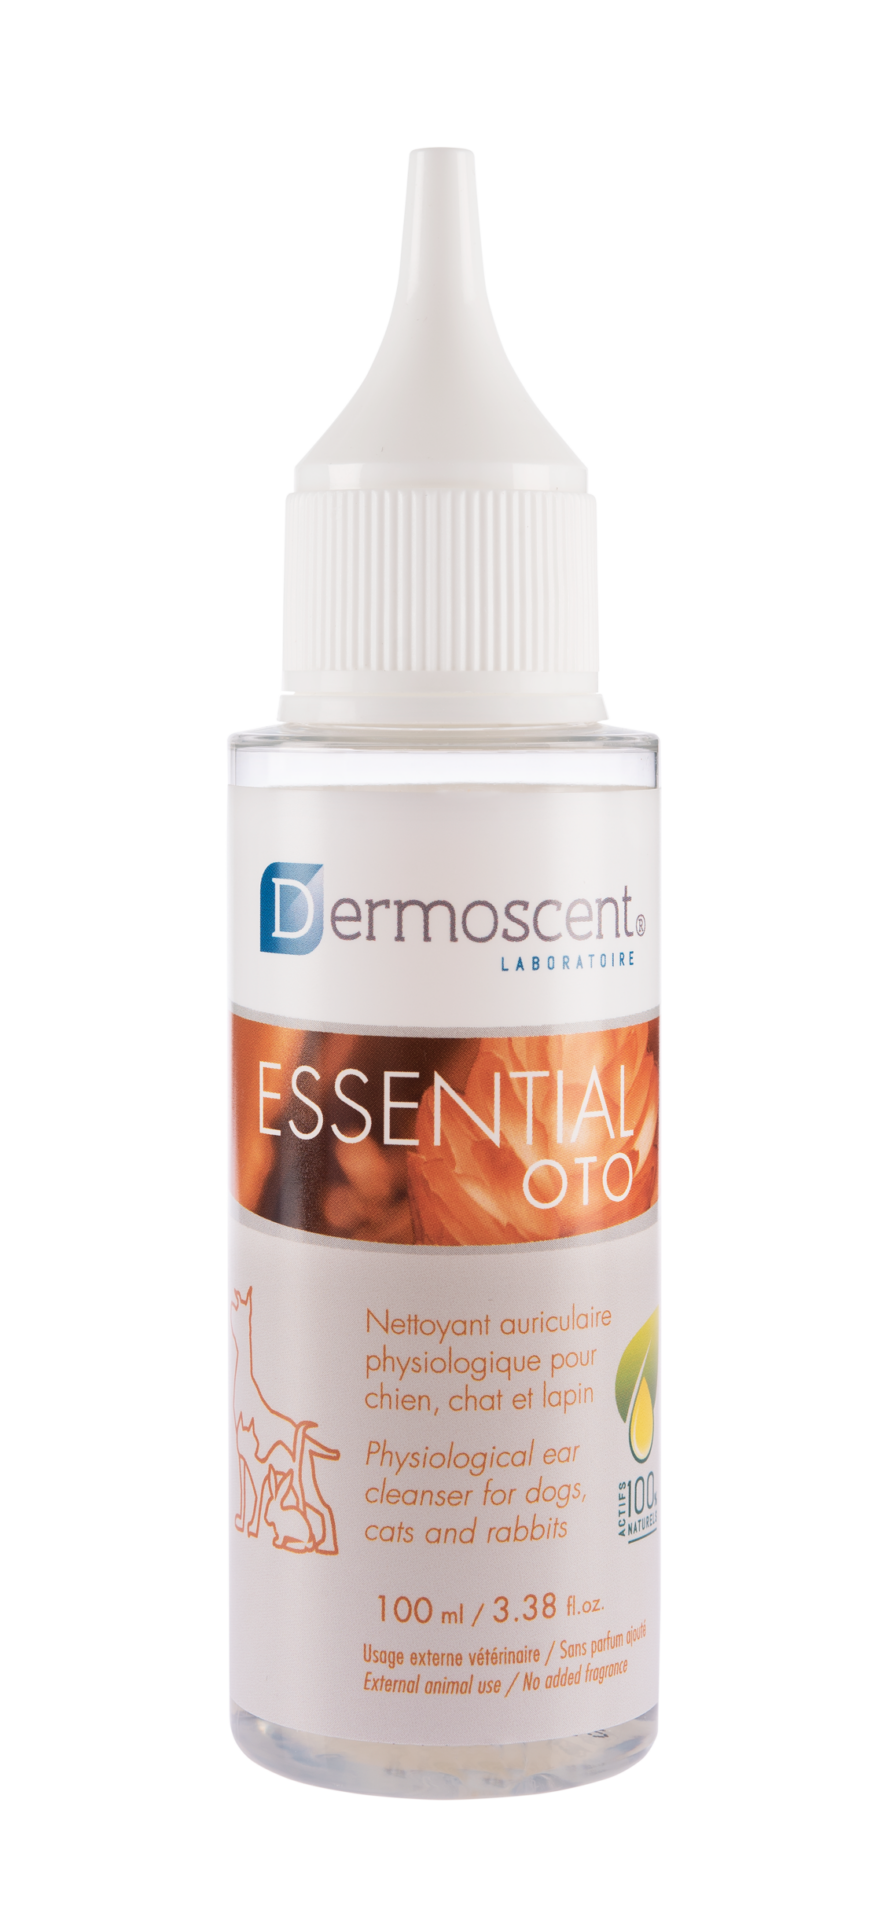 Essential Oto® for dogs, cats & rabbits